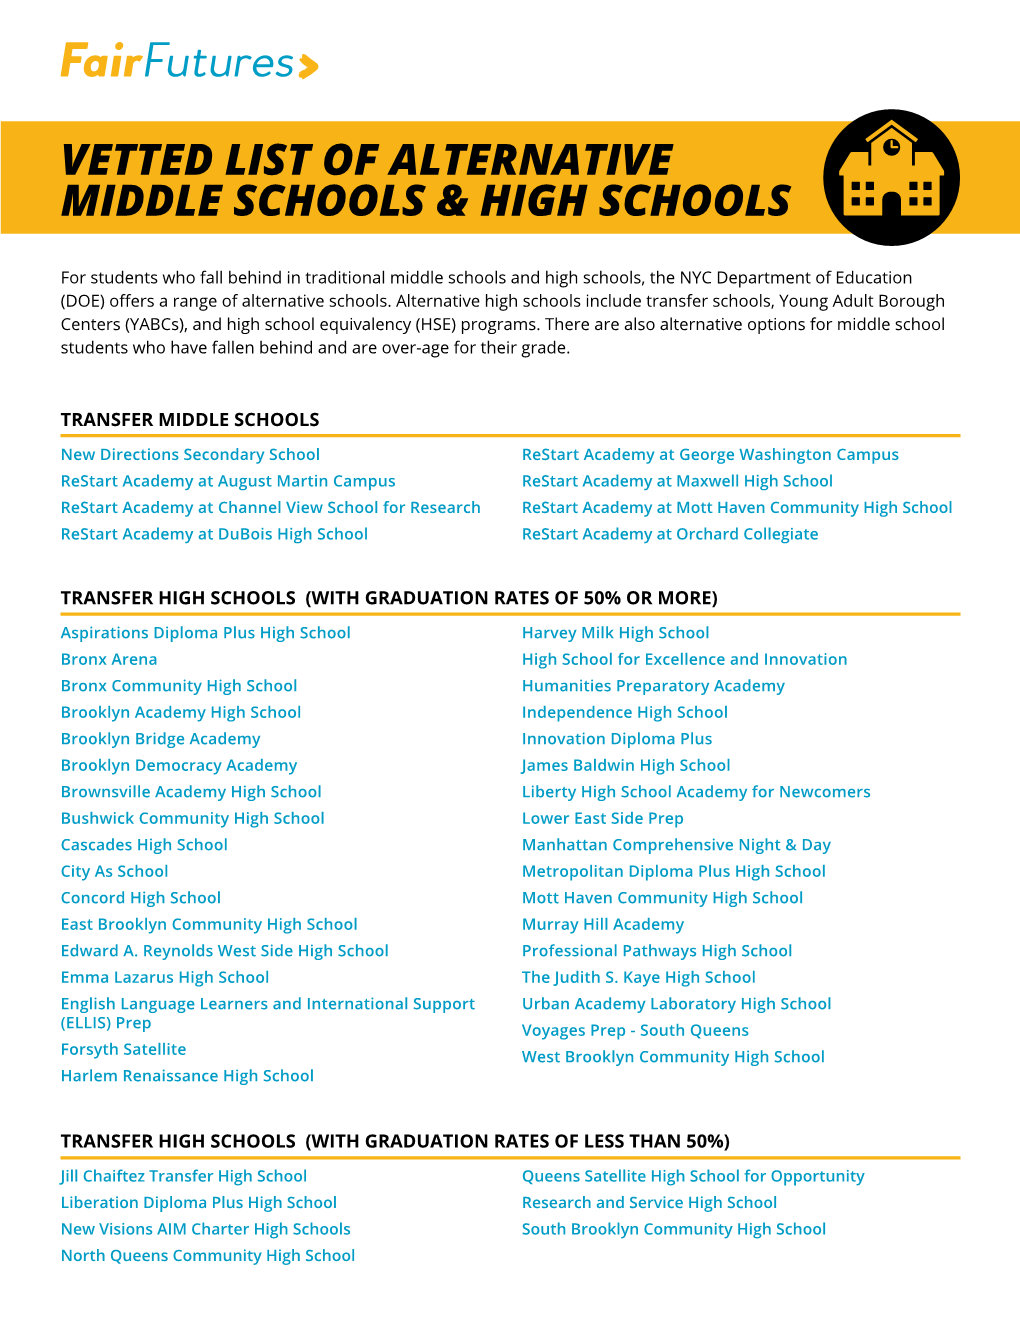 Vetted List of Alternative Middle Schools & High